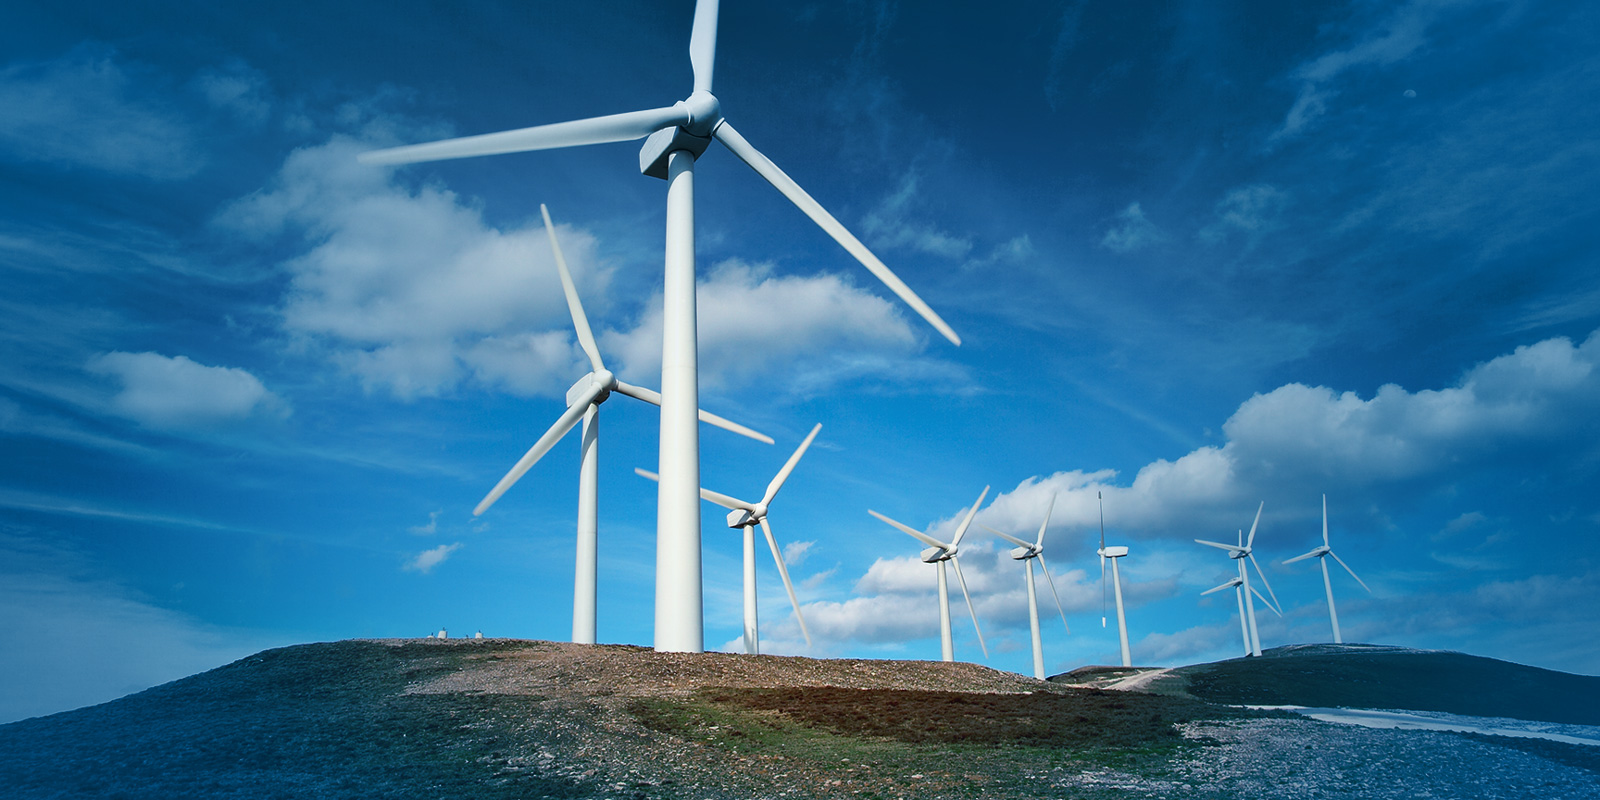 Taiwan Offshore Wind Farm Projects: Guiding Investors through the Legal and Regulatory Framework